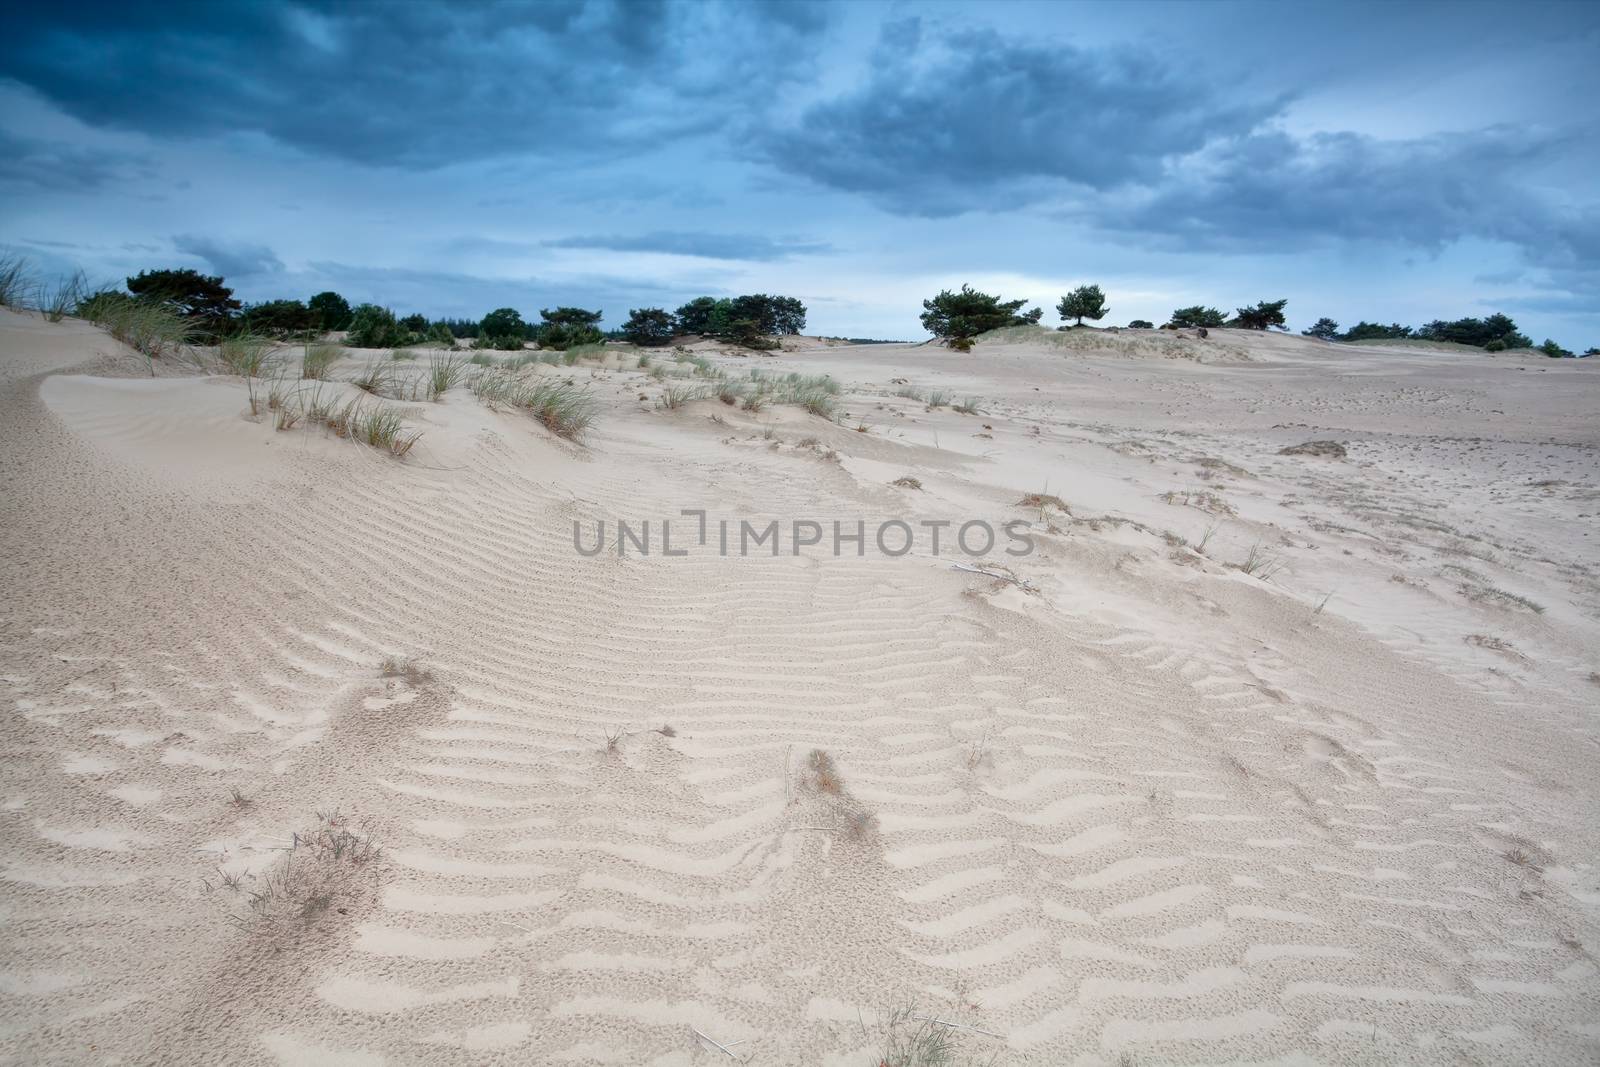 wind texture on sand dunes by catolla